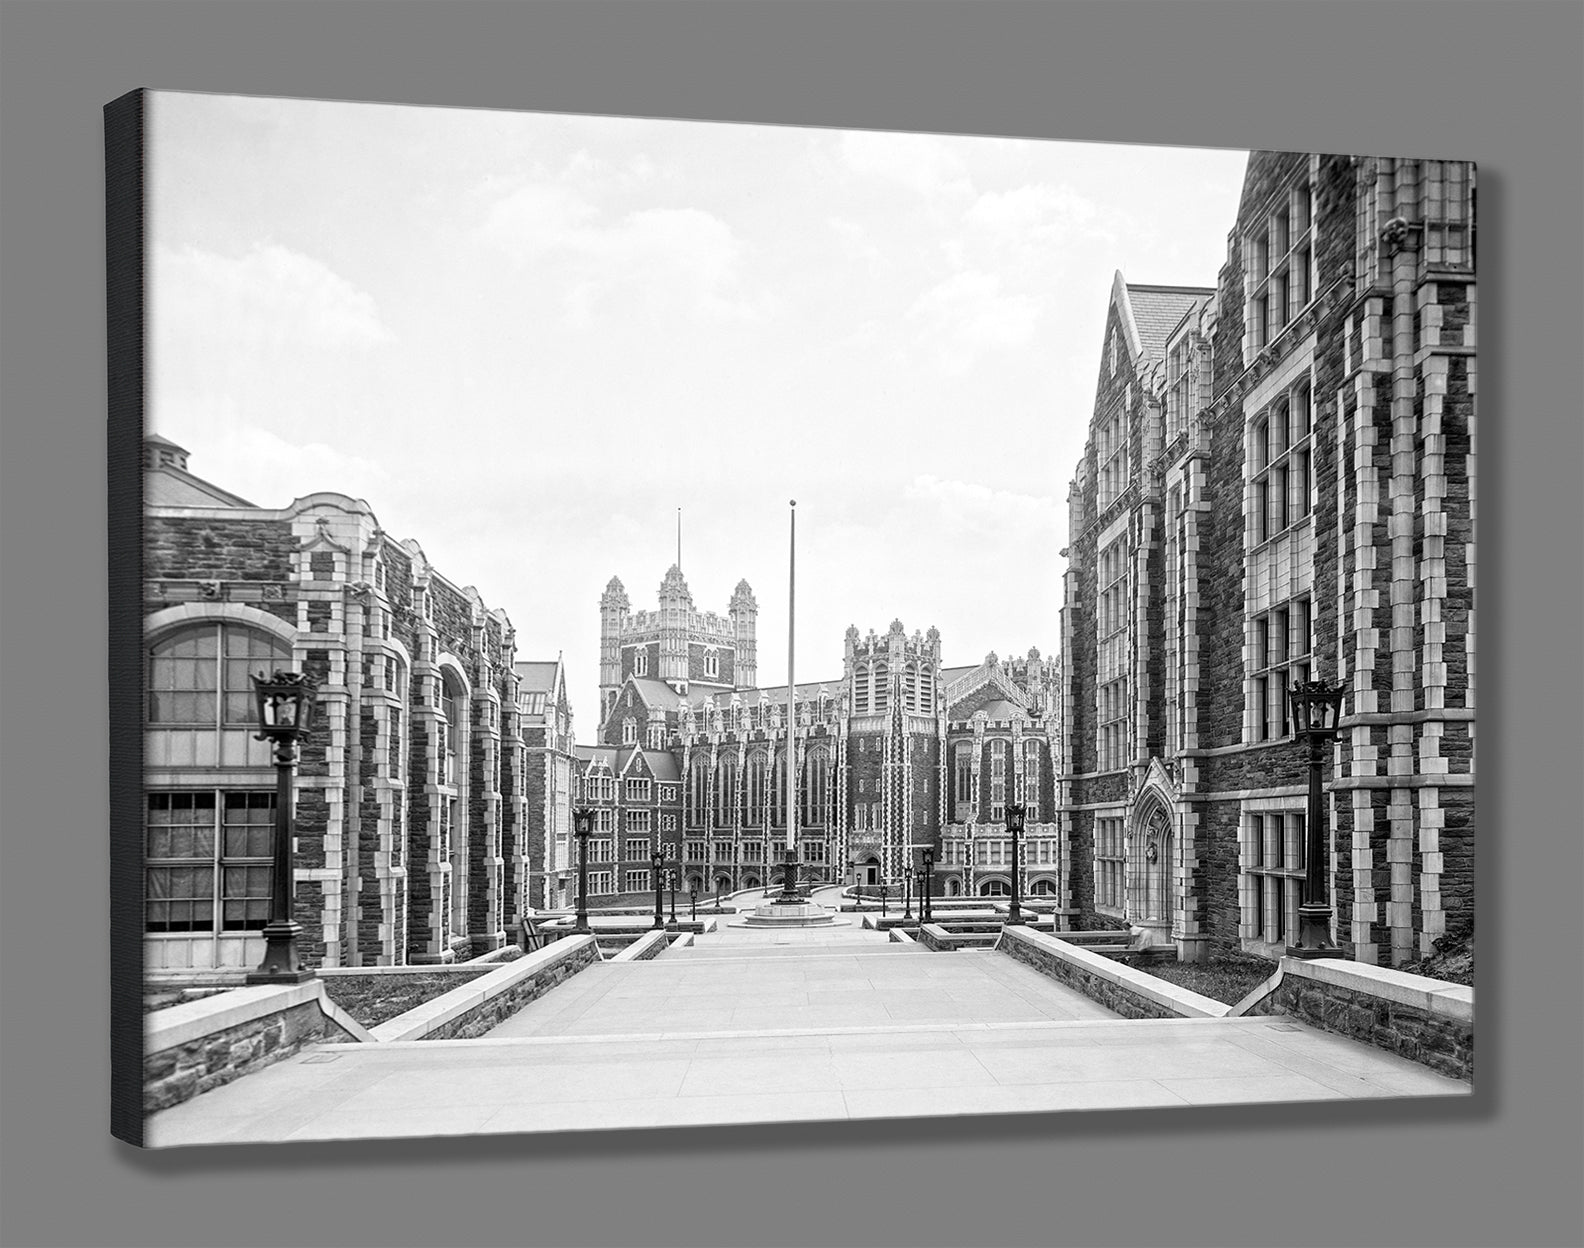 A canvas print mockup featuring a photograph of the campus of City College in New York City